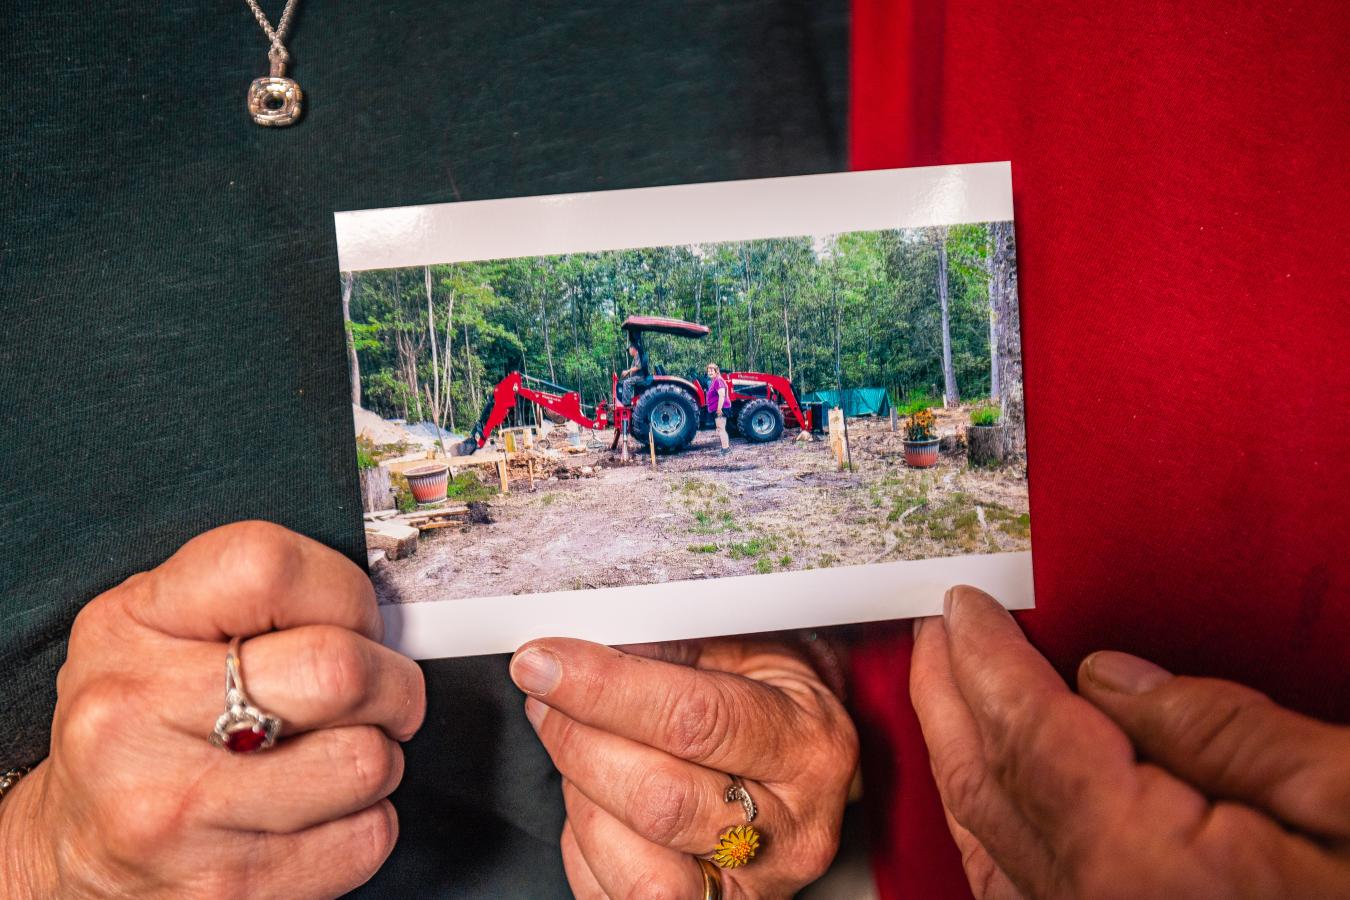 couple holding an image of their new tractor